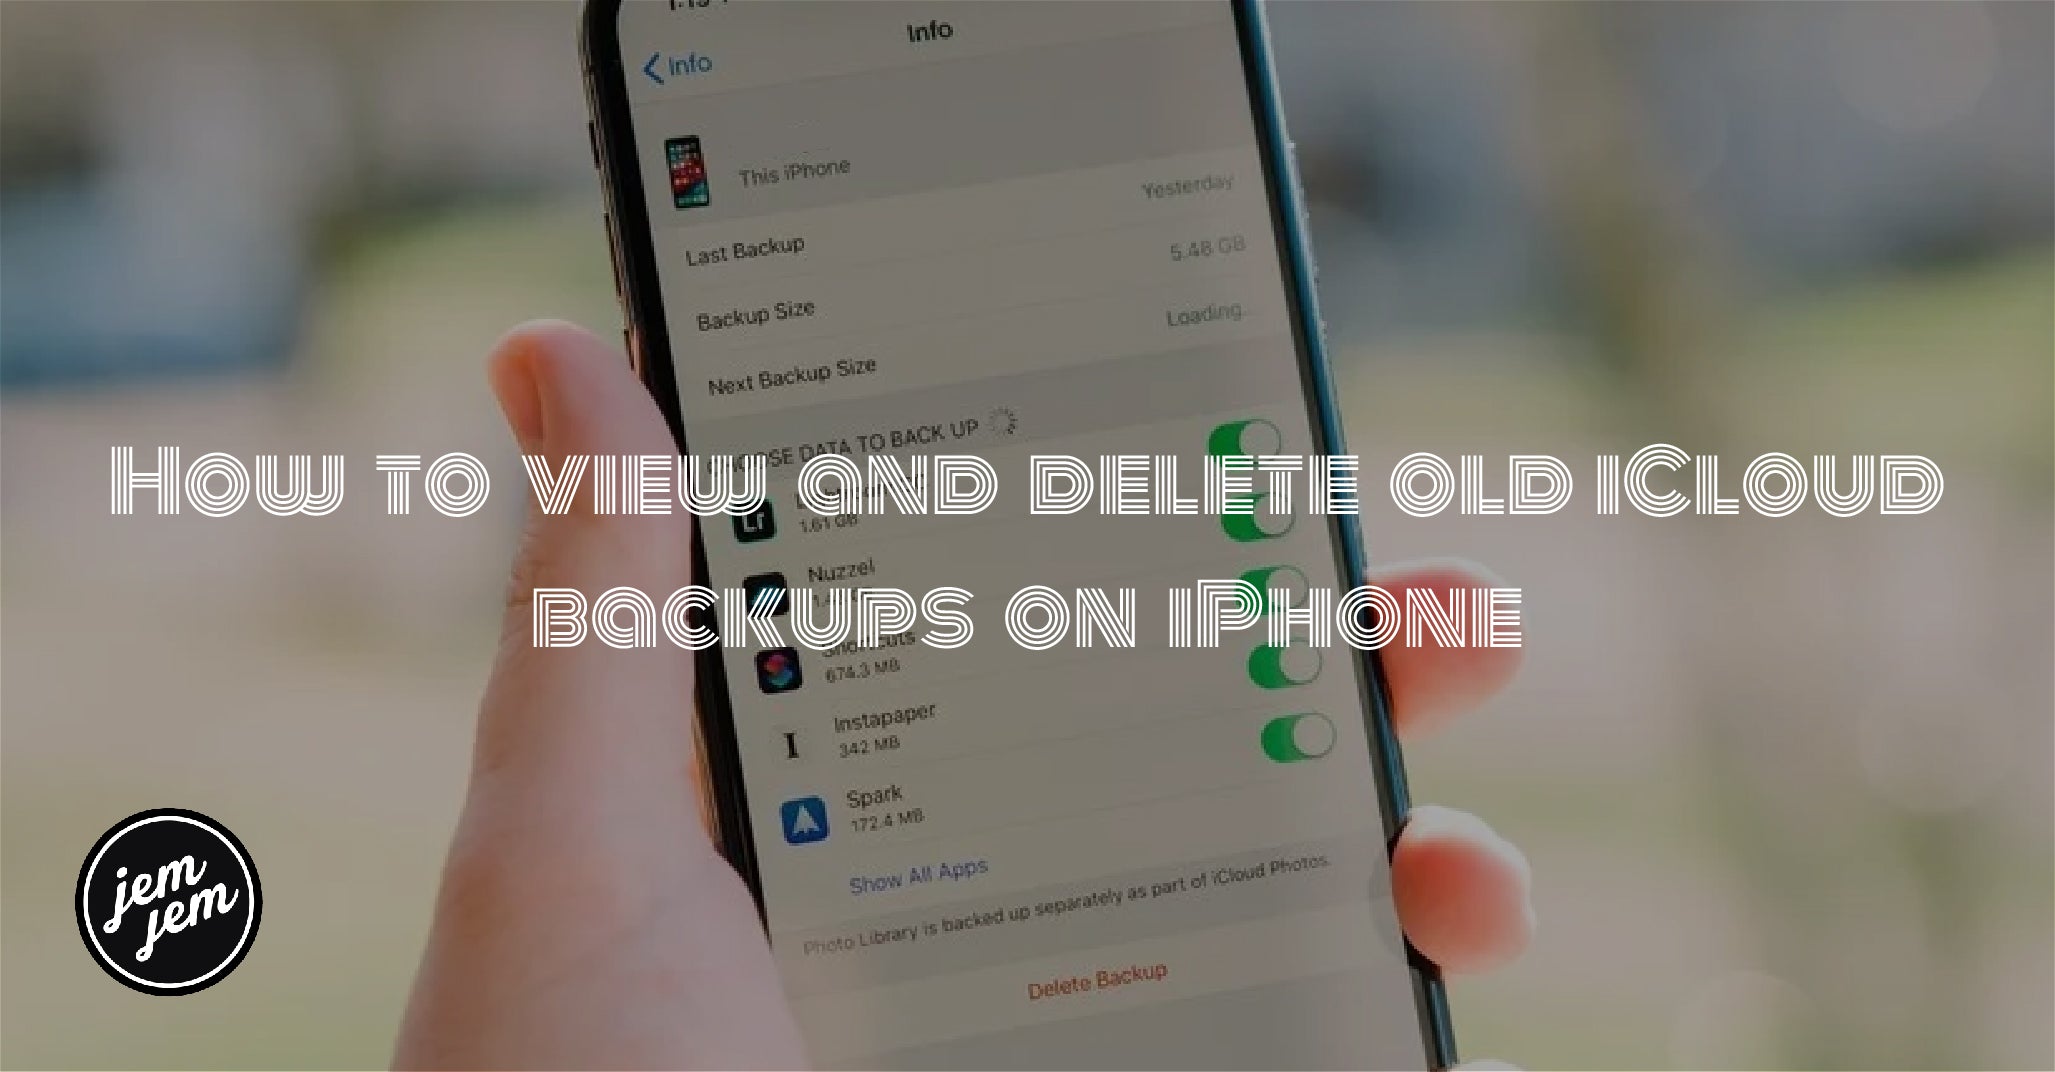 How to view and delete old iCloud backups on iPhone